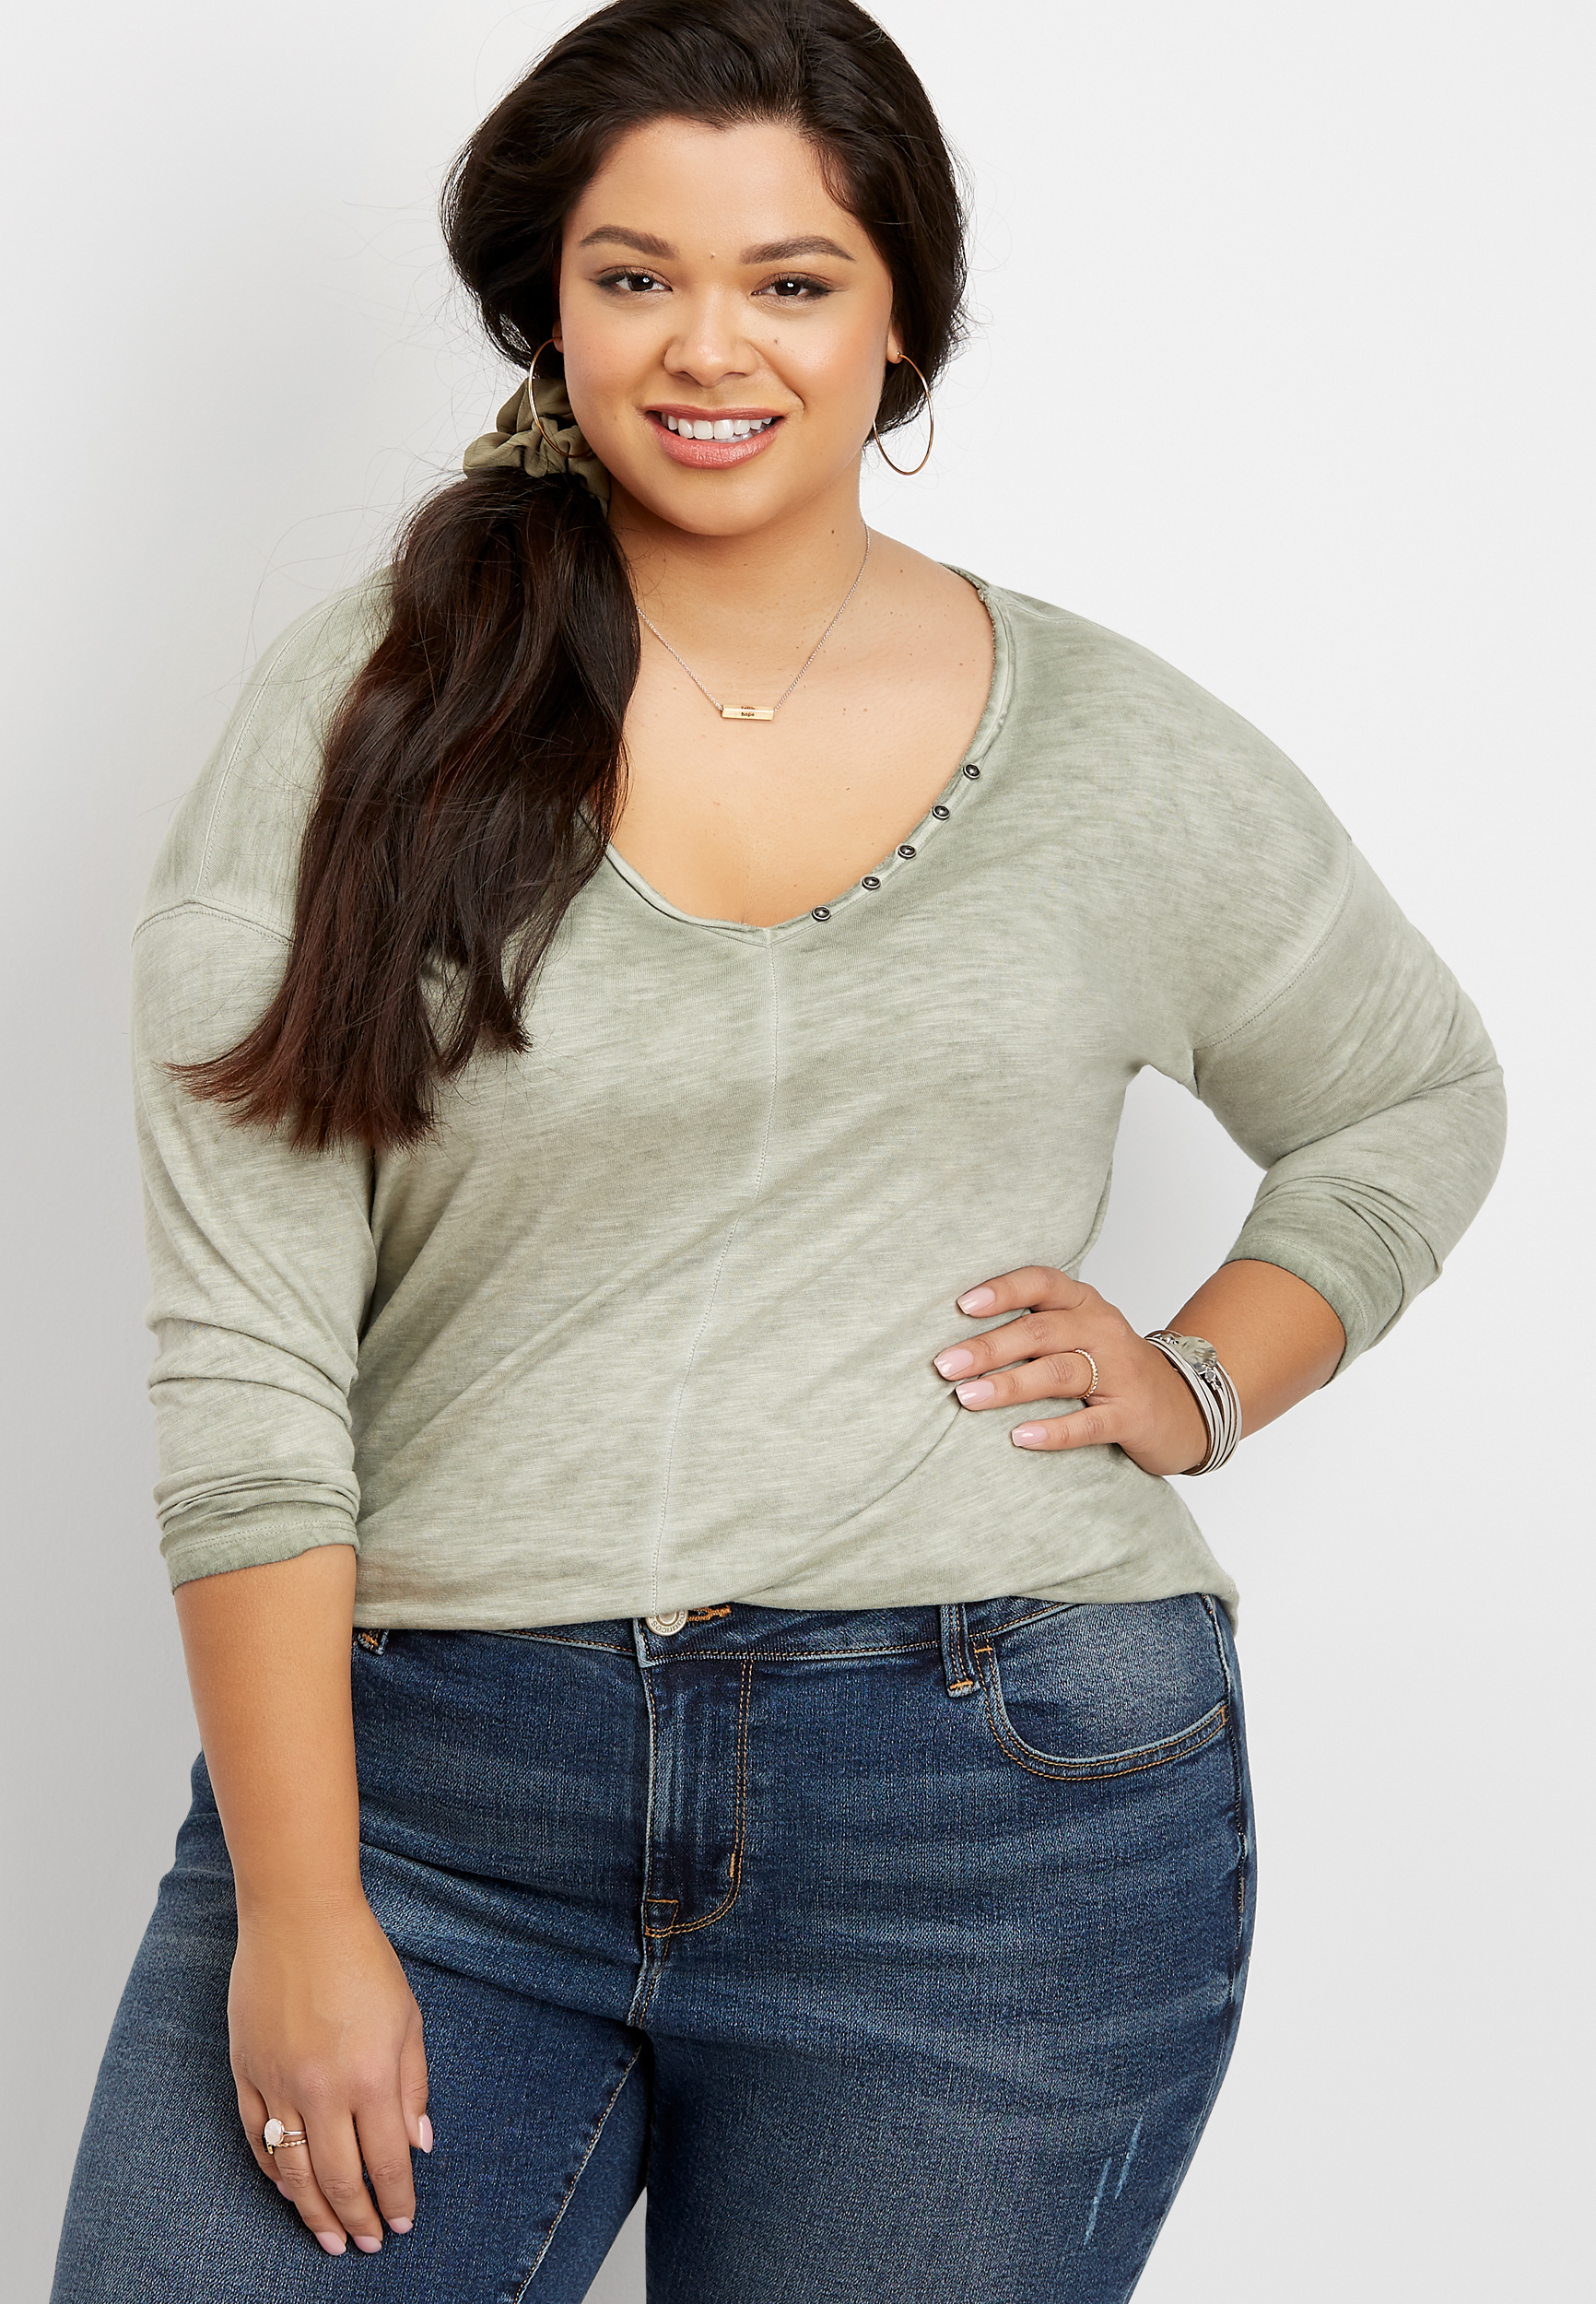 Plus Size 24/7 Wearever Solid Tee | maurices